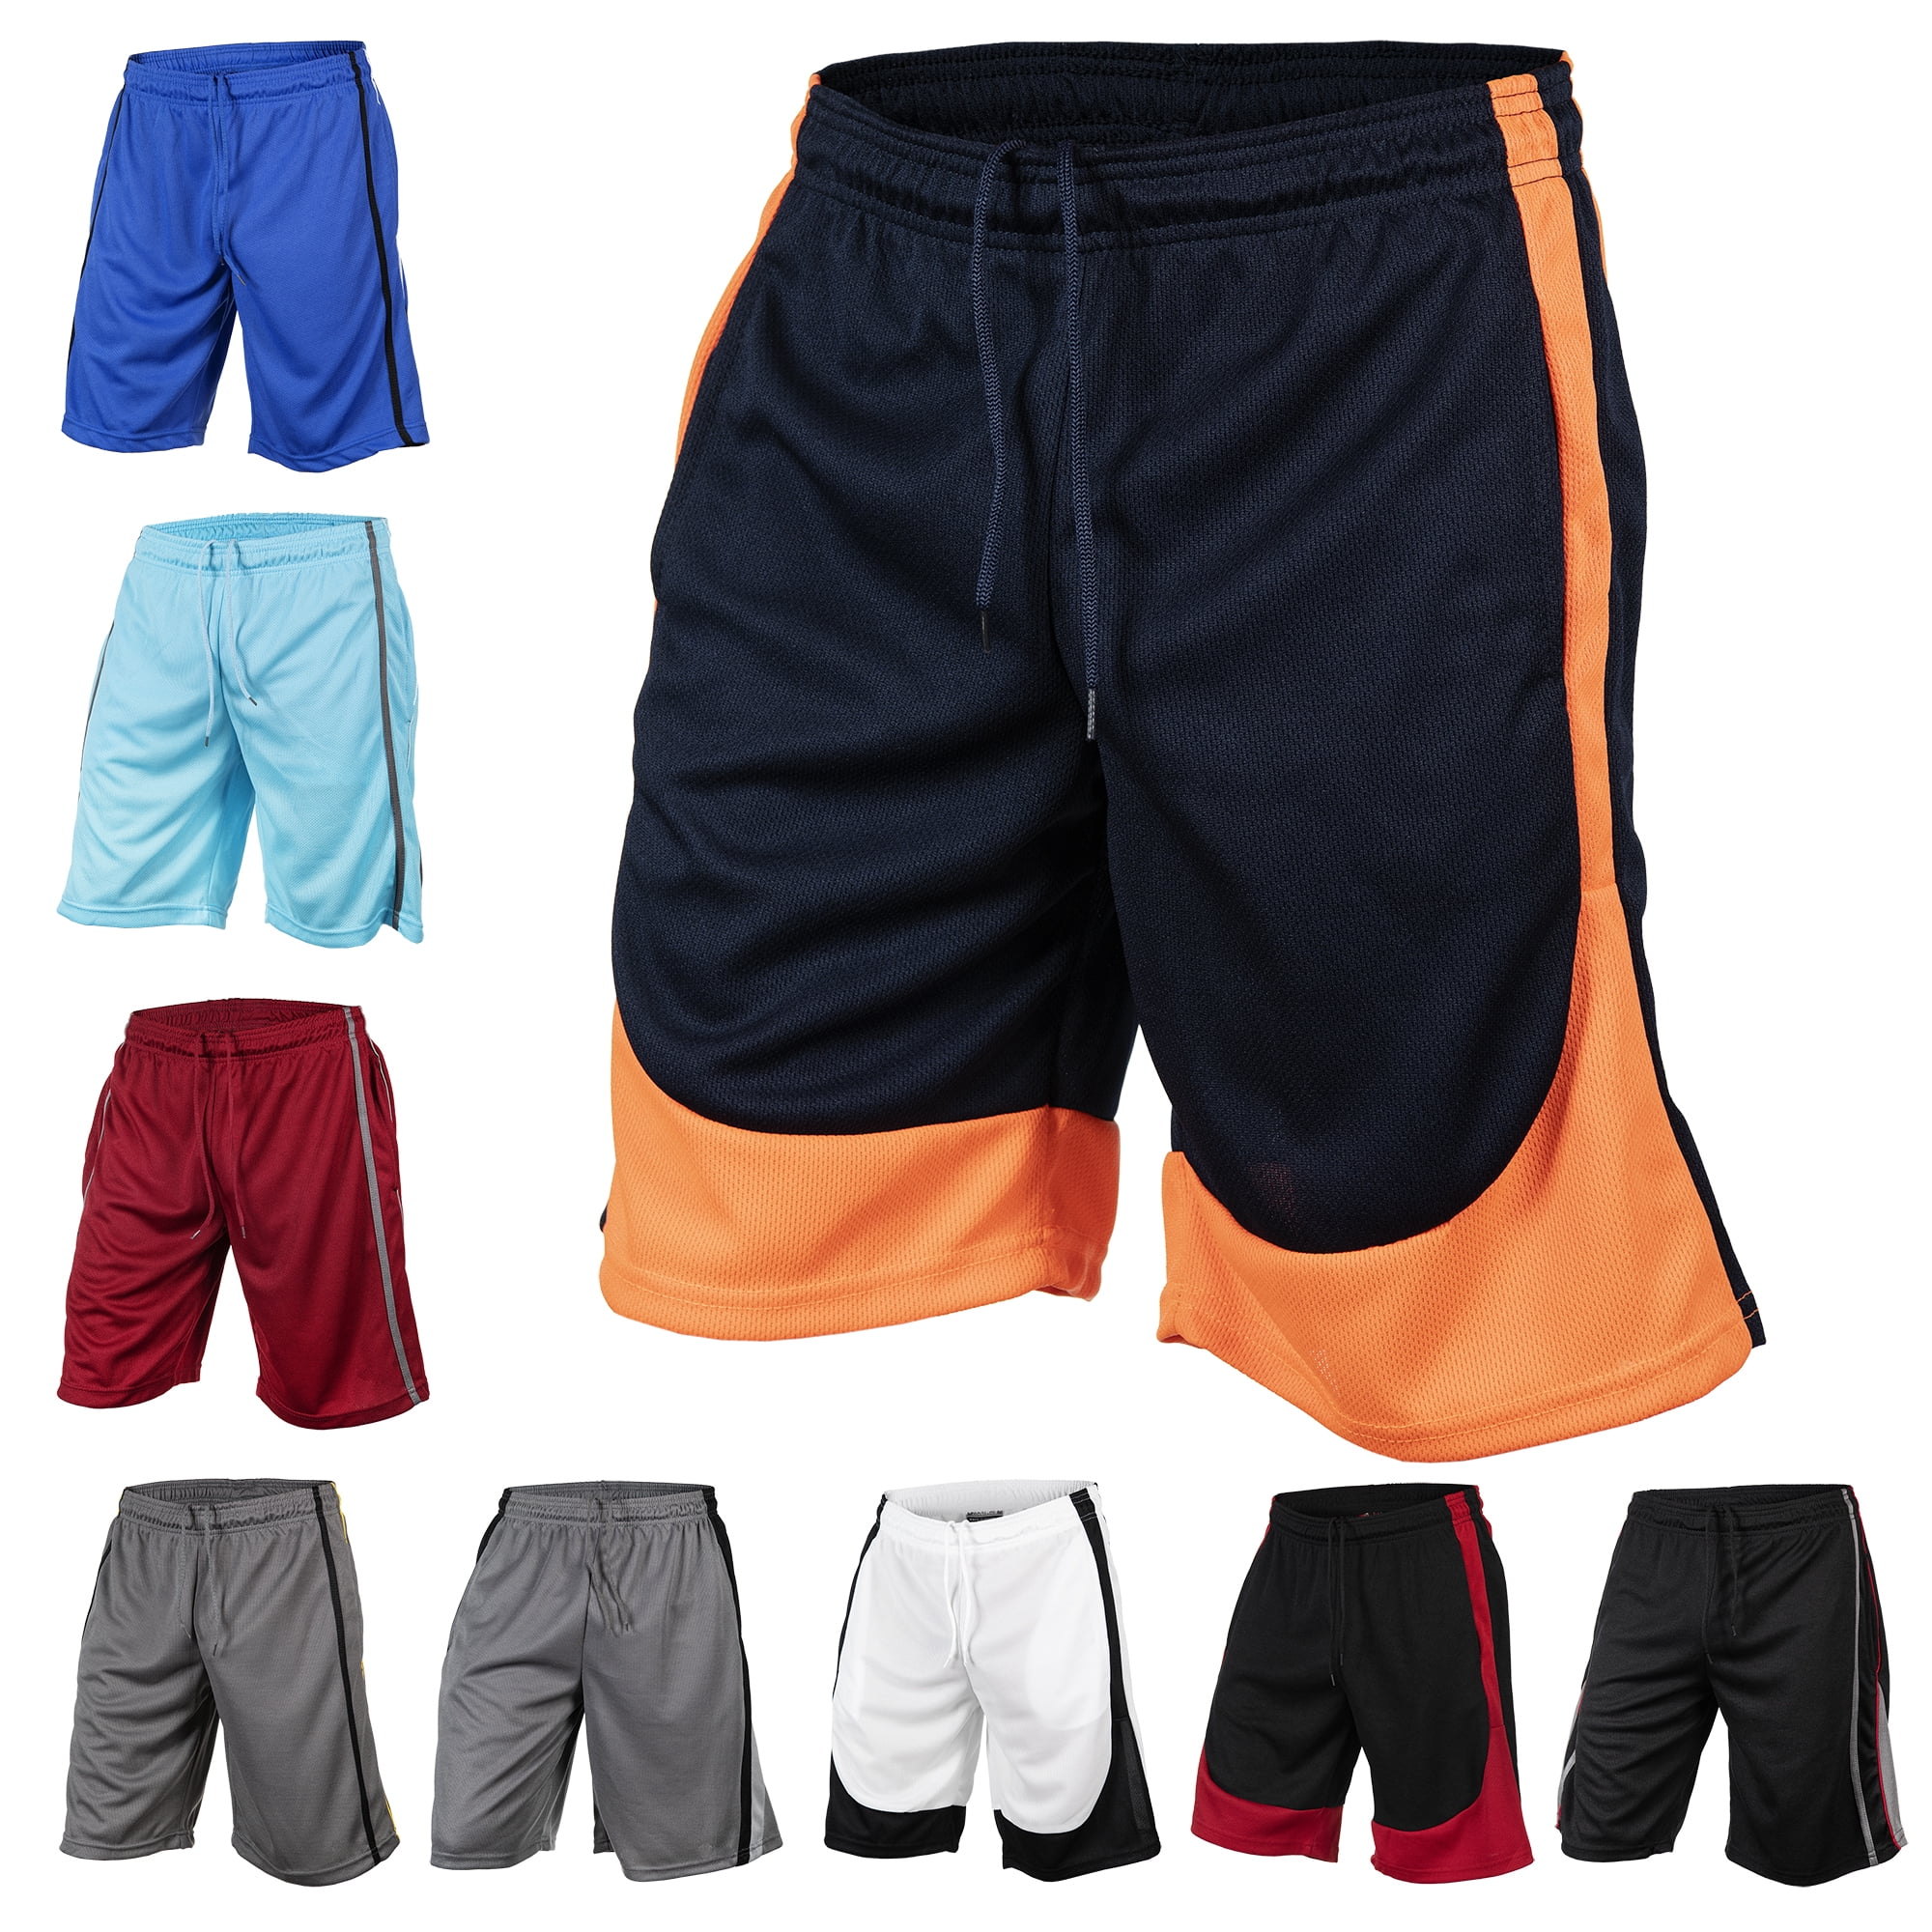 Mens Mesh Training & Basketball Shorts with Pockets All Colors & Sizes S 5XL